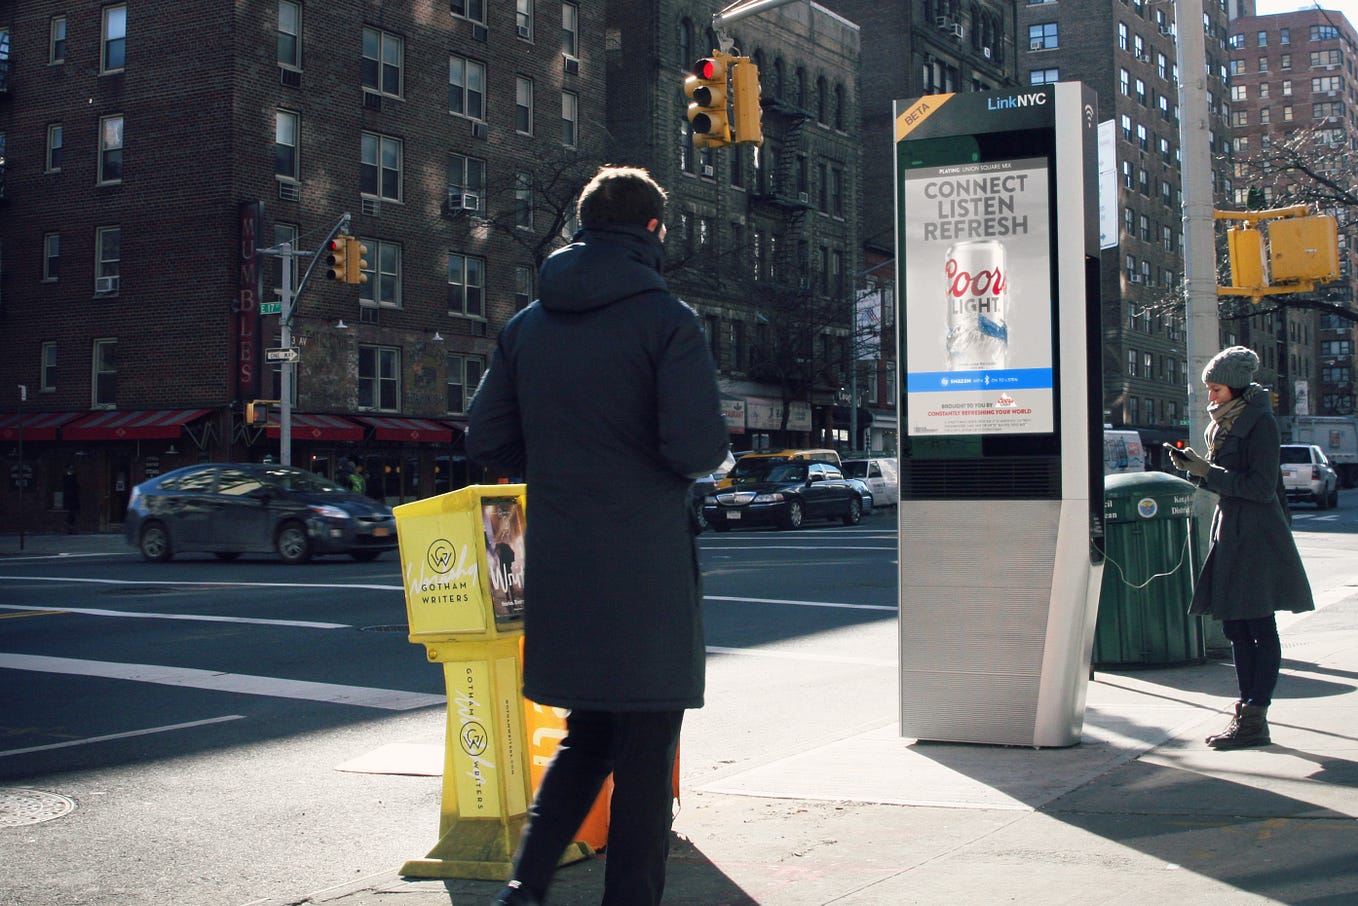 Secure Browsing on LinkNYC’s Wi-Fi Networks